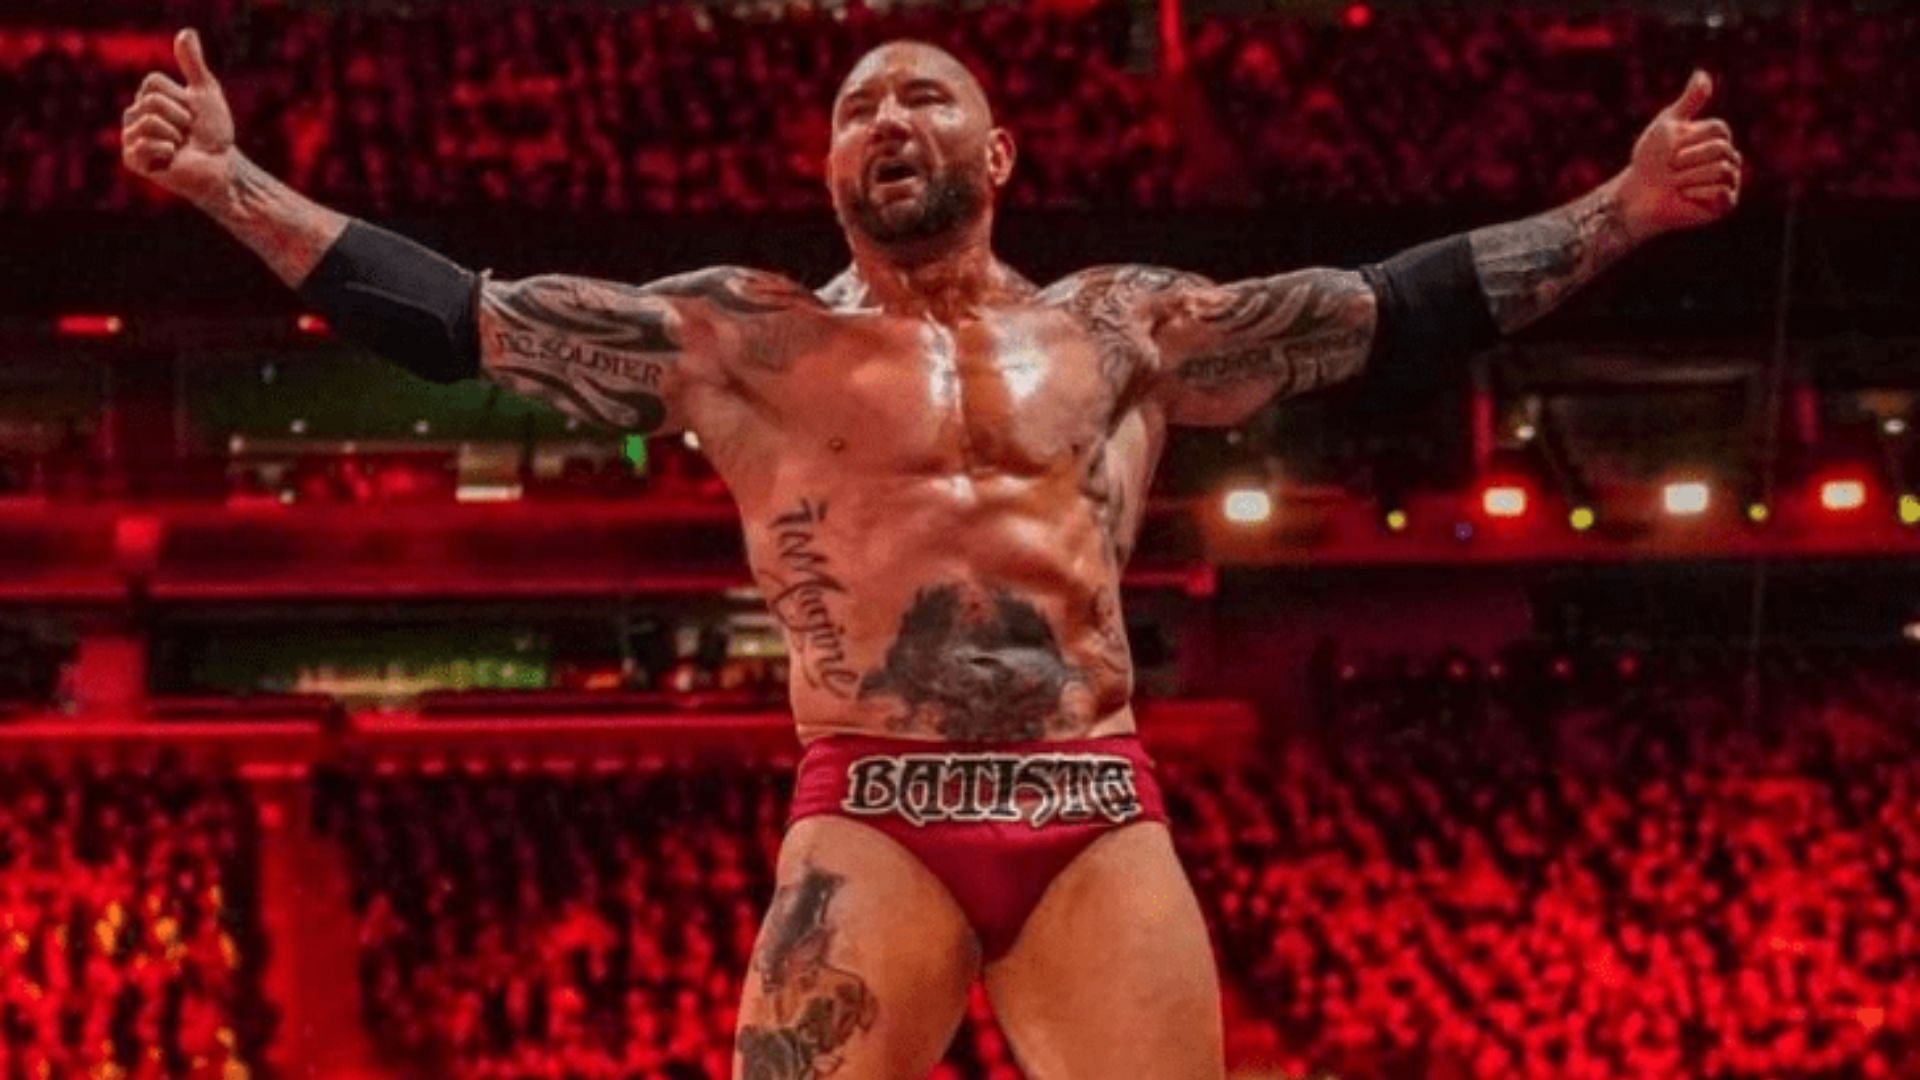 [Photo] 45yearold WWE Superstar spotted with Batista in public